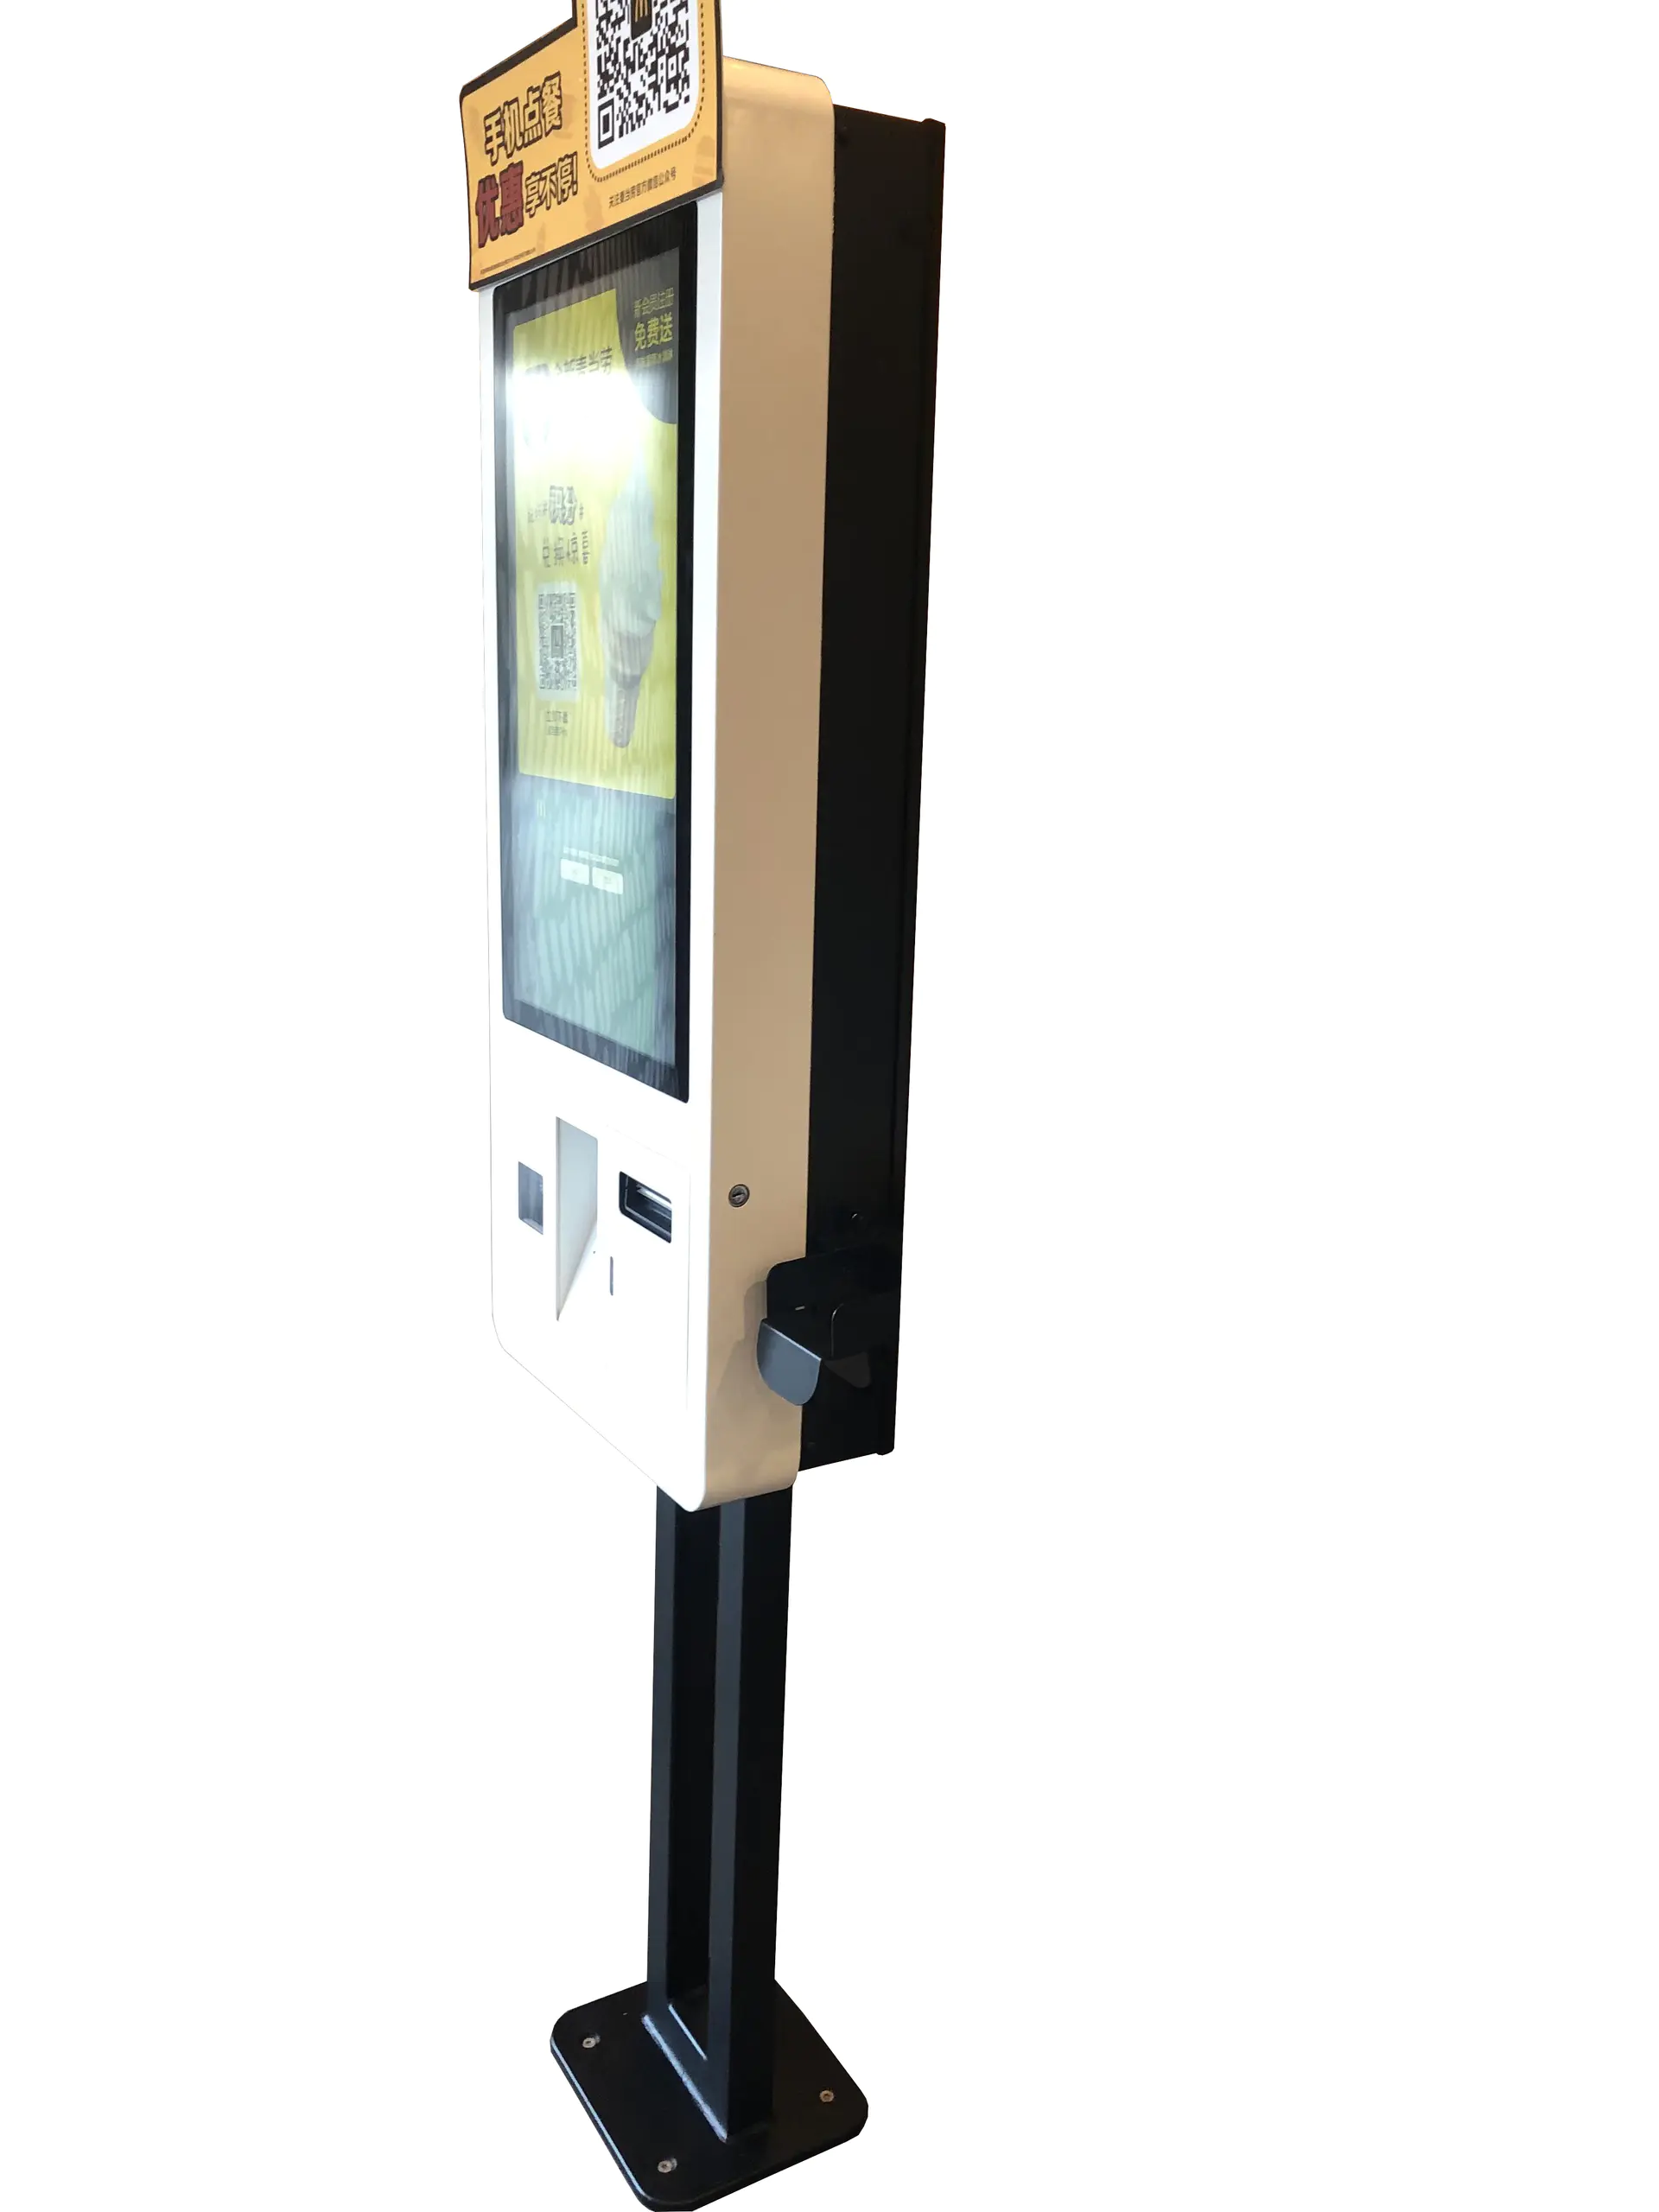 27 inch floor stand LCD digital signage solutions self-payment fast food ordering kiosk